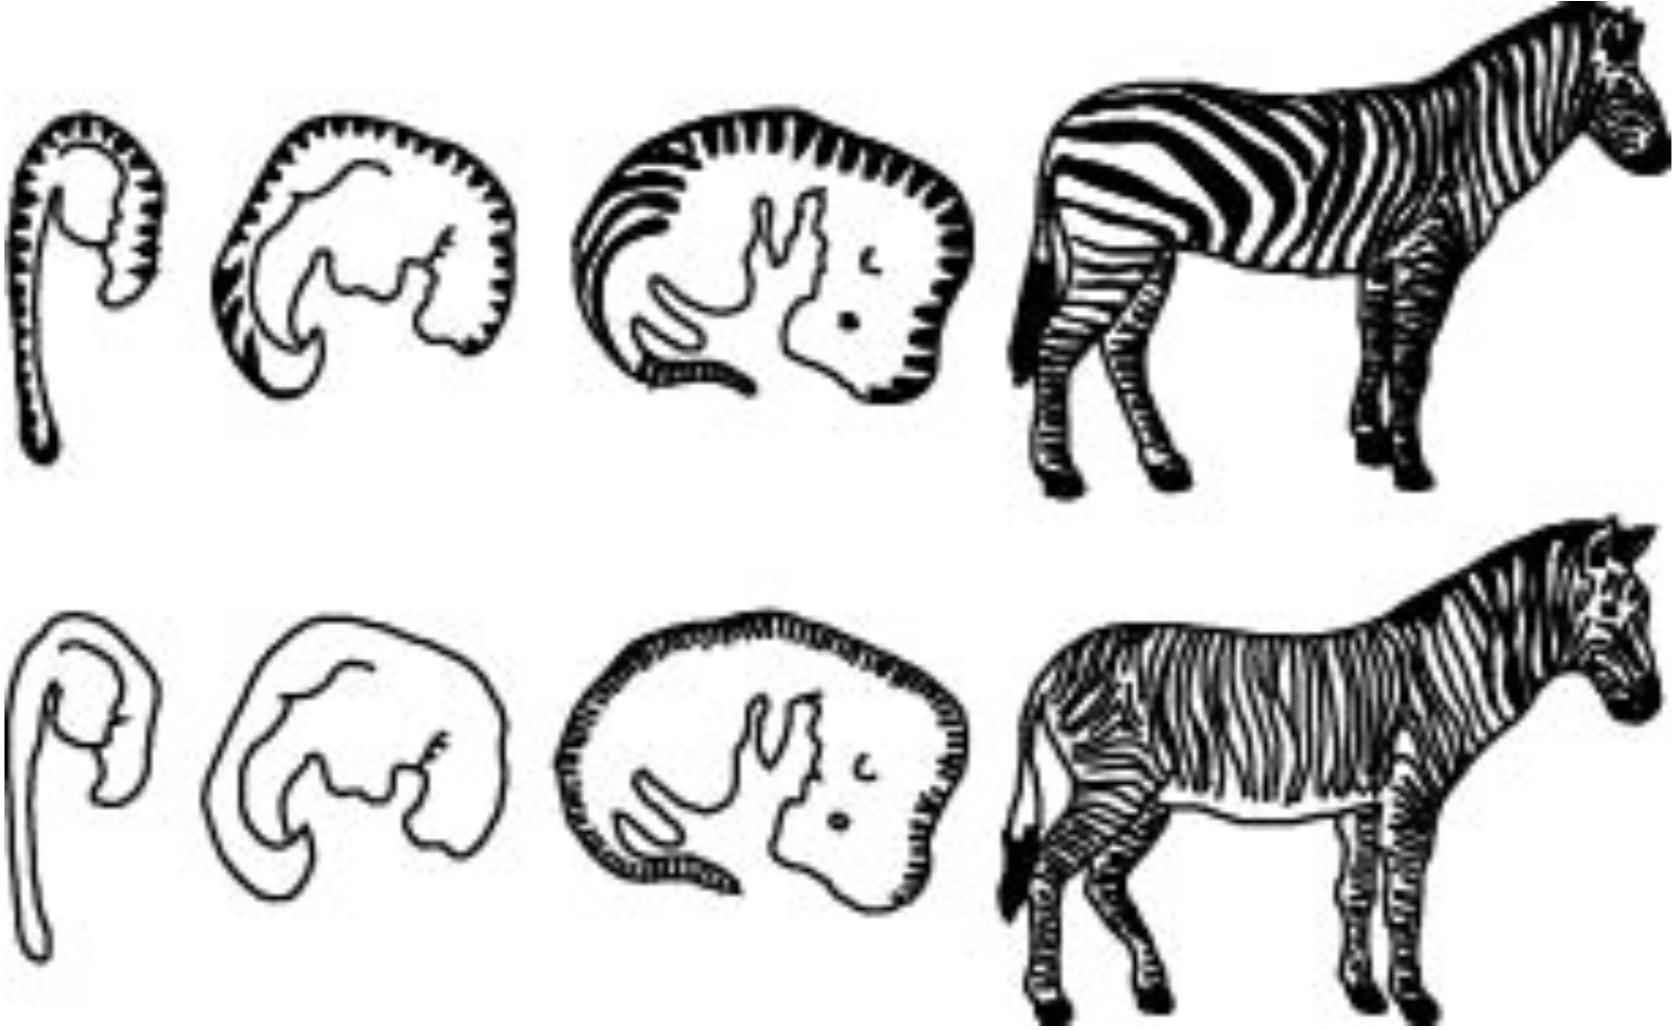 FIGURE 5. Embryonic development and stripe patterns of the zebras Equus burchelli (top) and Equus grevyi (bottom). Illustration drawn by Carole B. (after Alberch 1985).